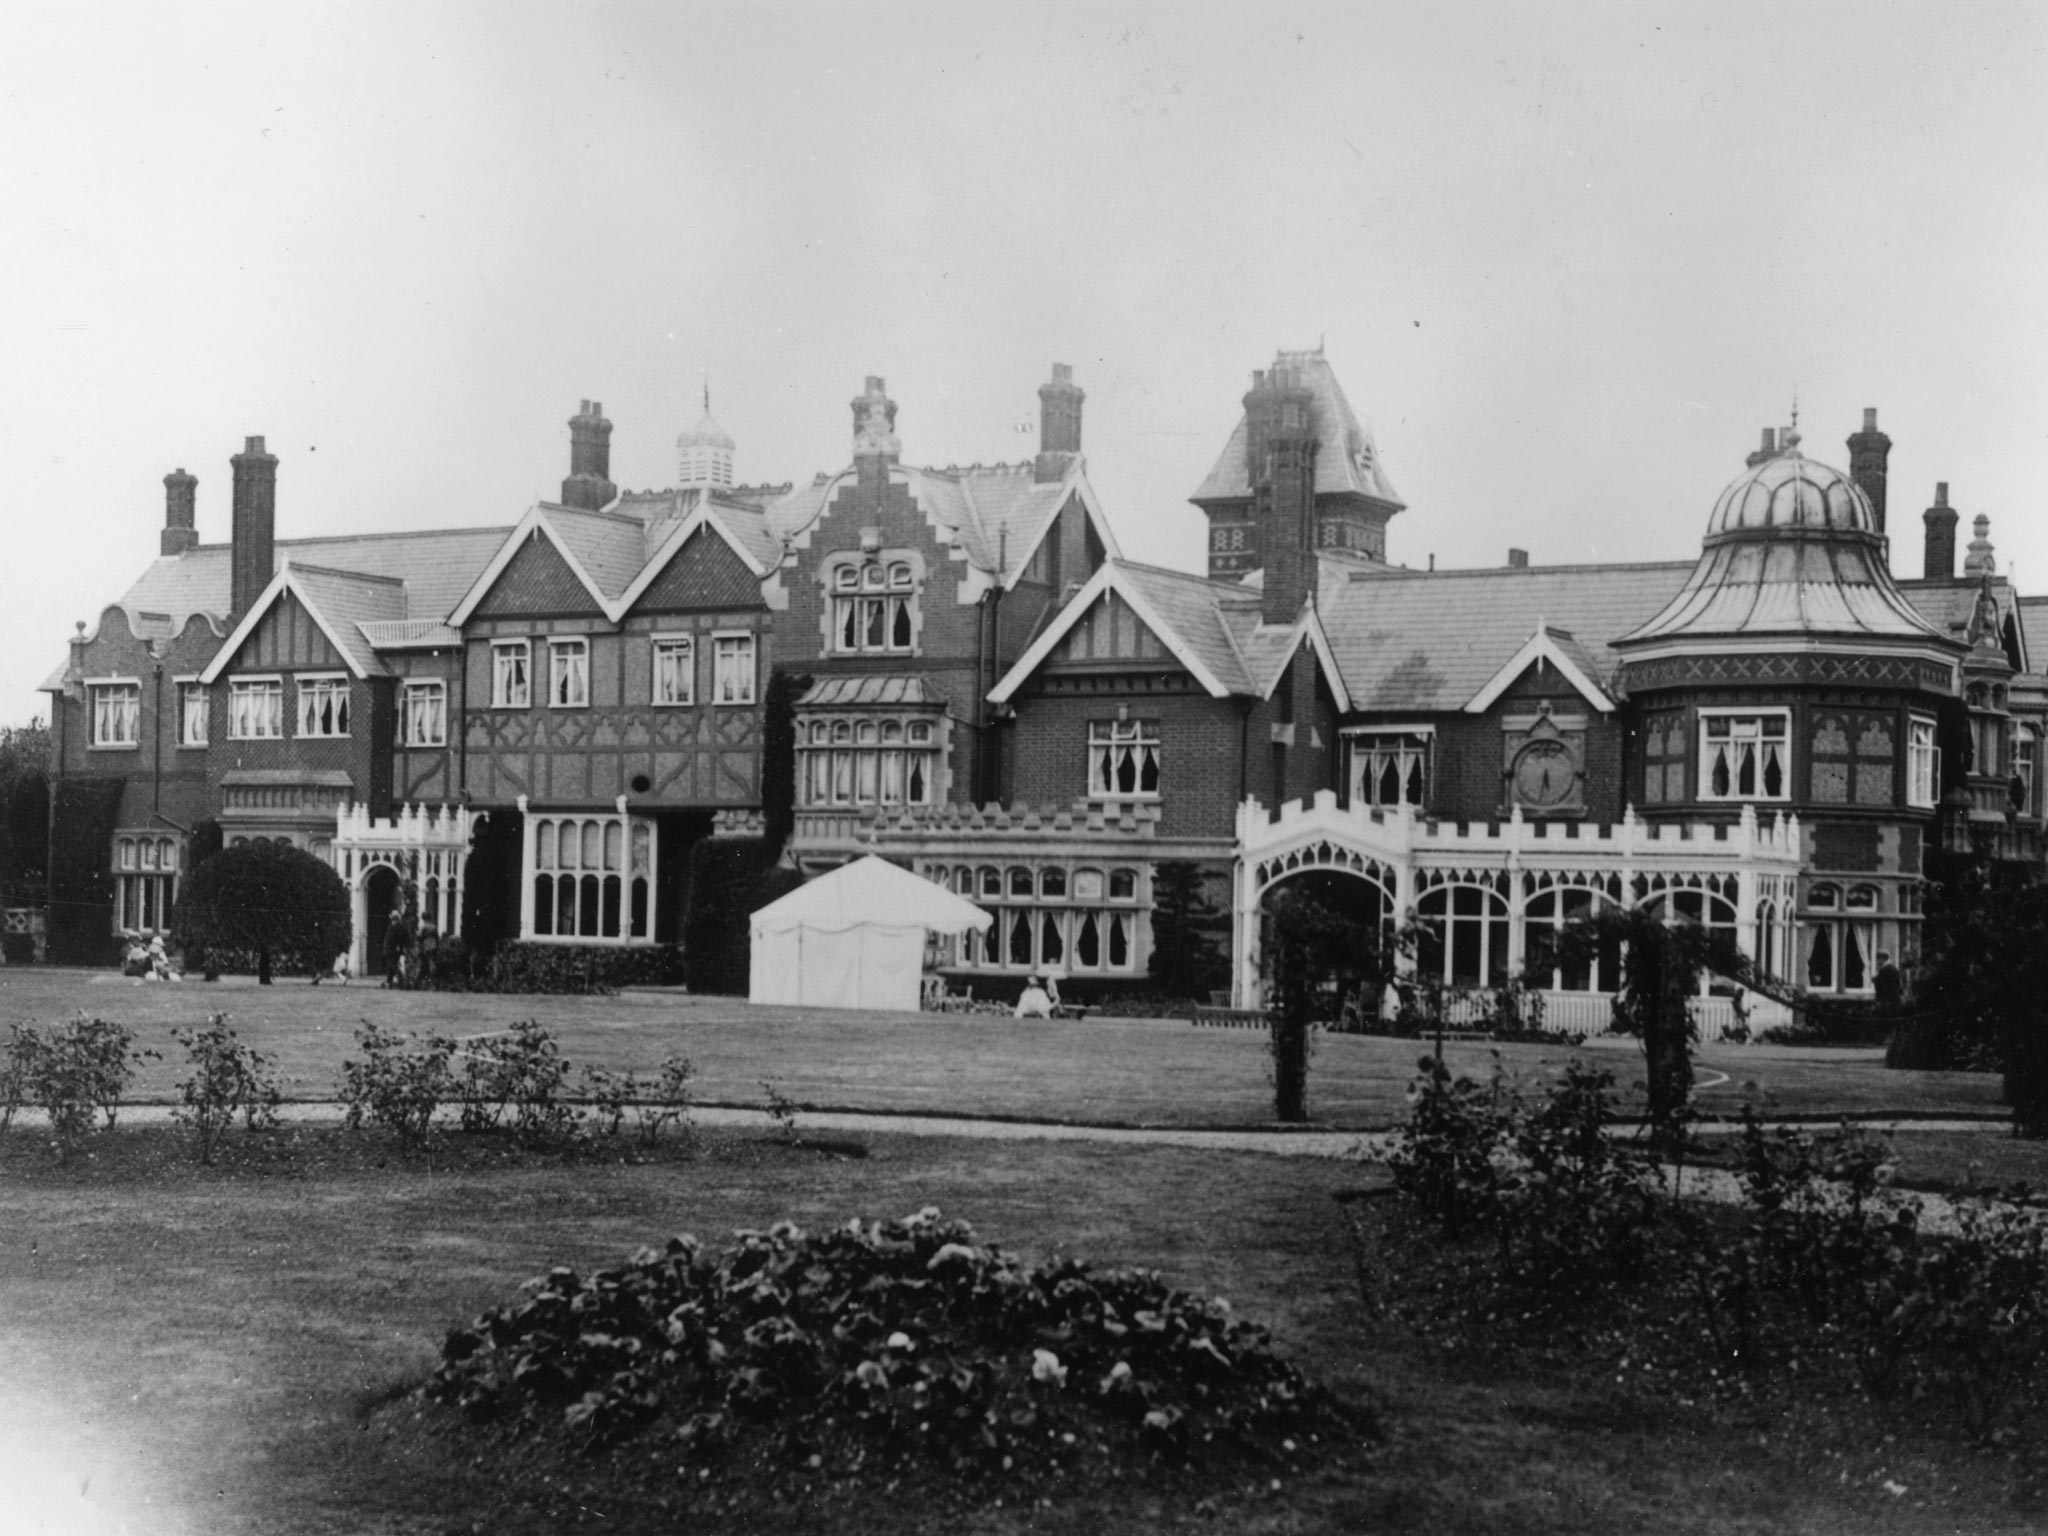 Bletchley Park which housed the first electronic digital computer